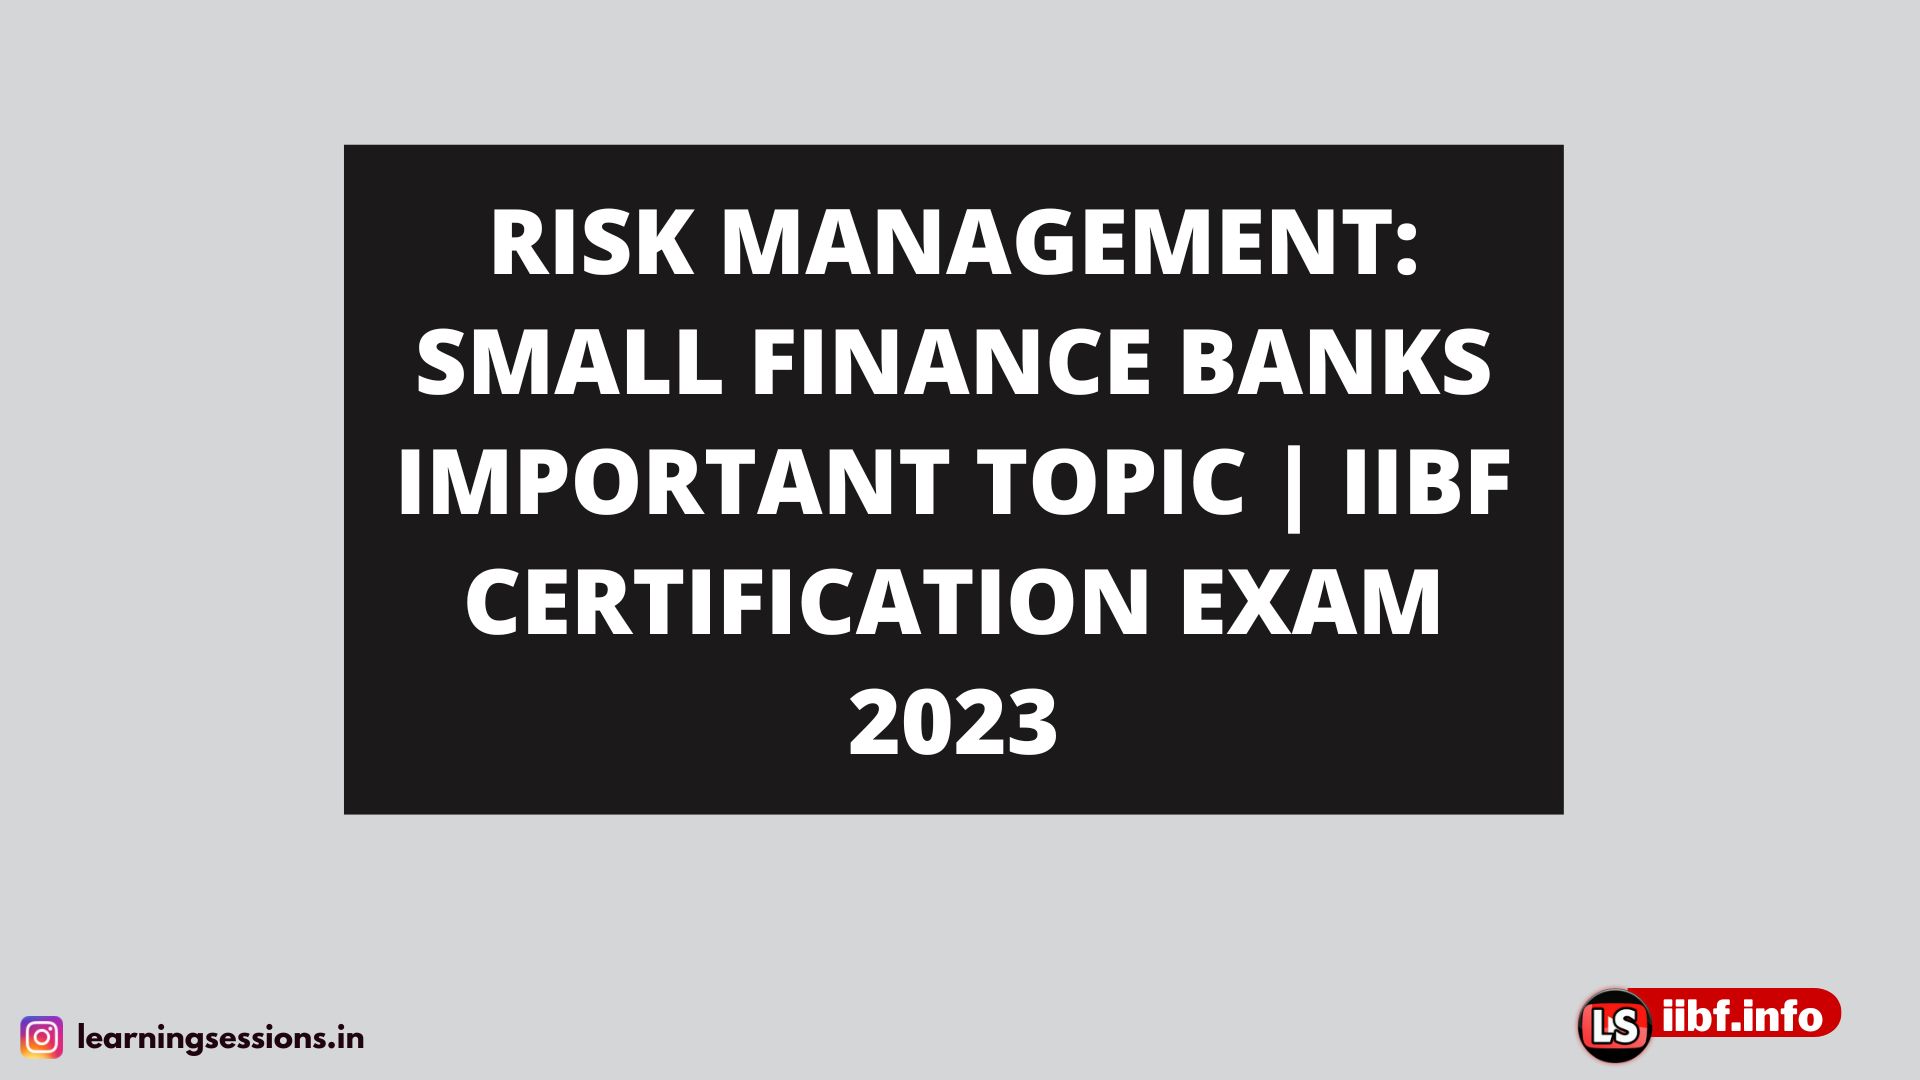 RISK MANAGEMENT: SMALL FINANCE BANKS IMPORTANT TOPIC | IIBF CERTIFICATION EXAM 2023